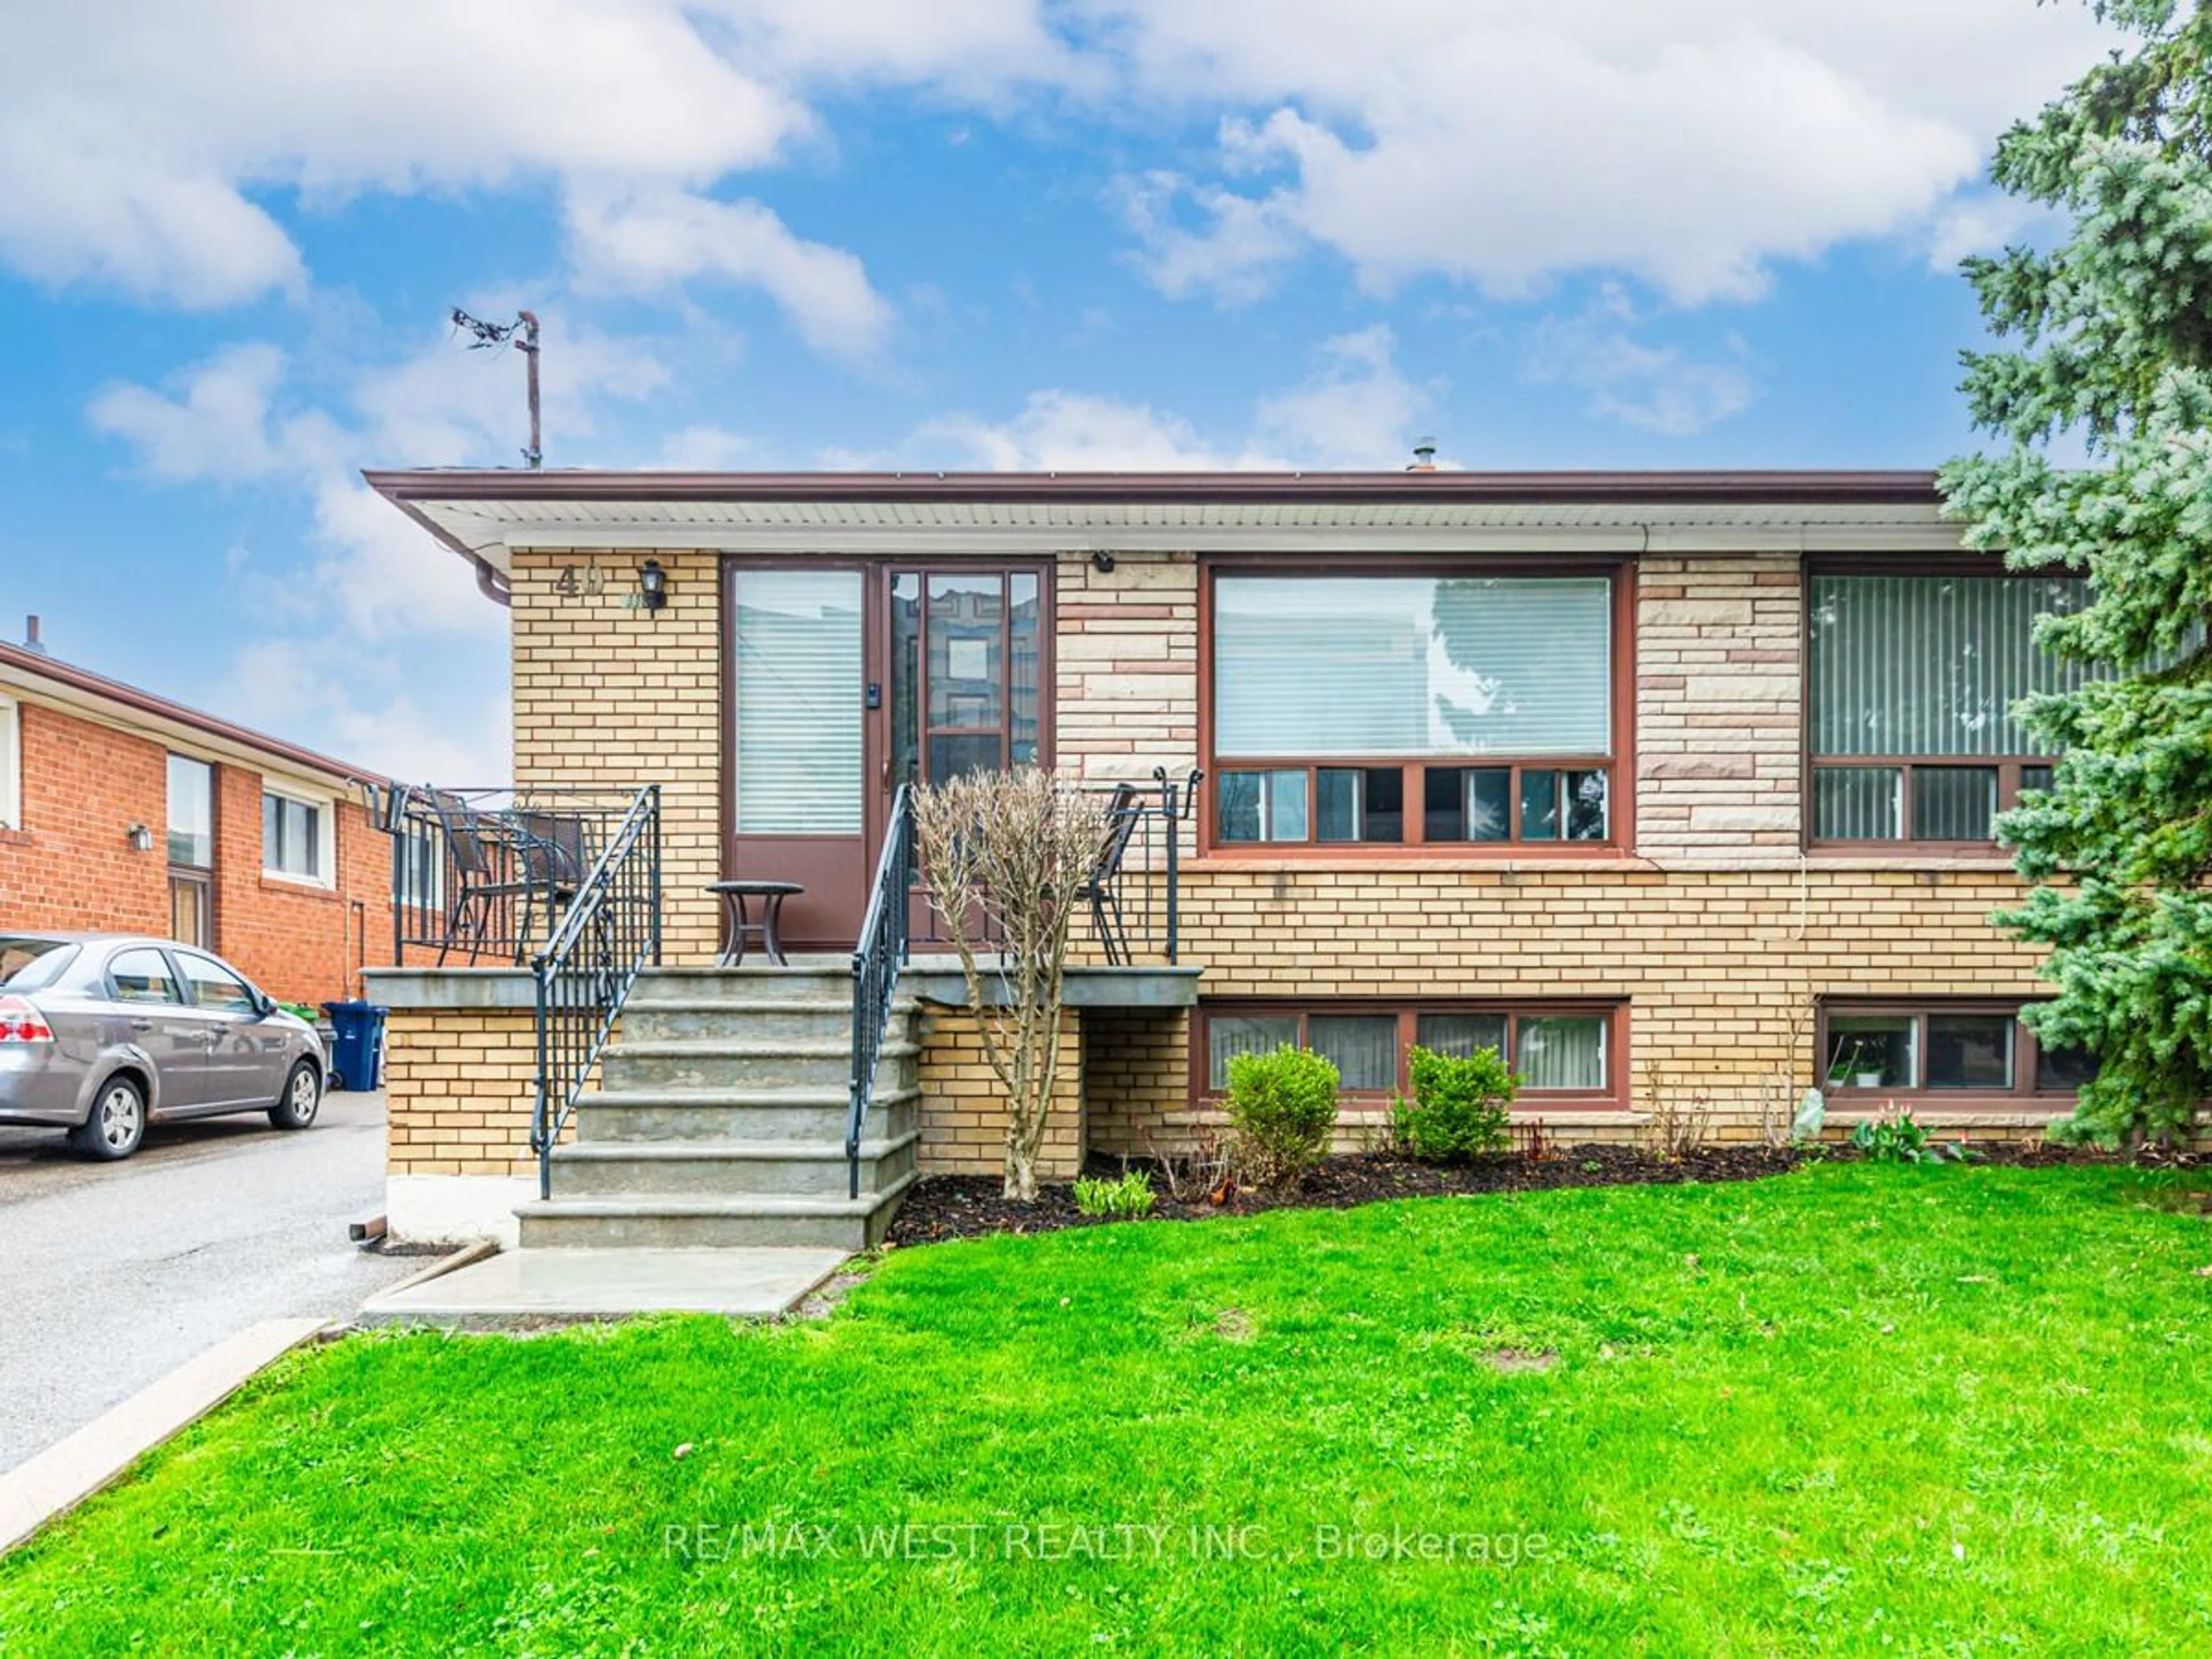 Home with brick exterior material for 40 Wintergreen Rd, Toronto Ontario M3M 2J2